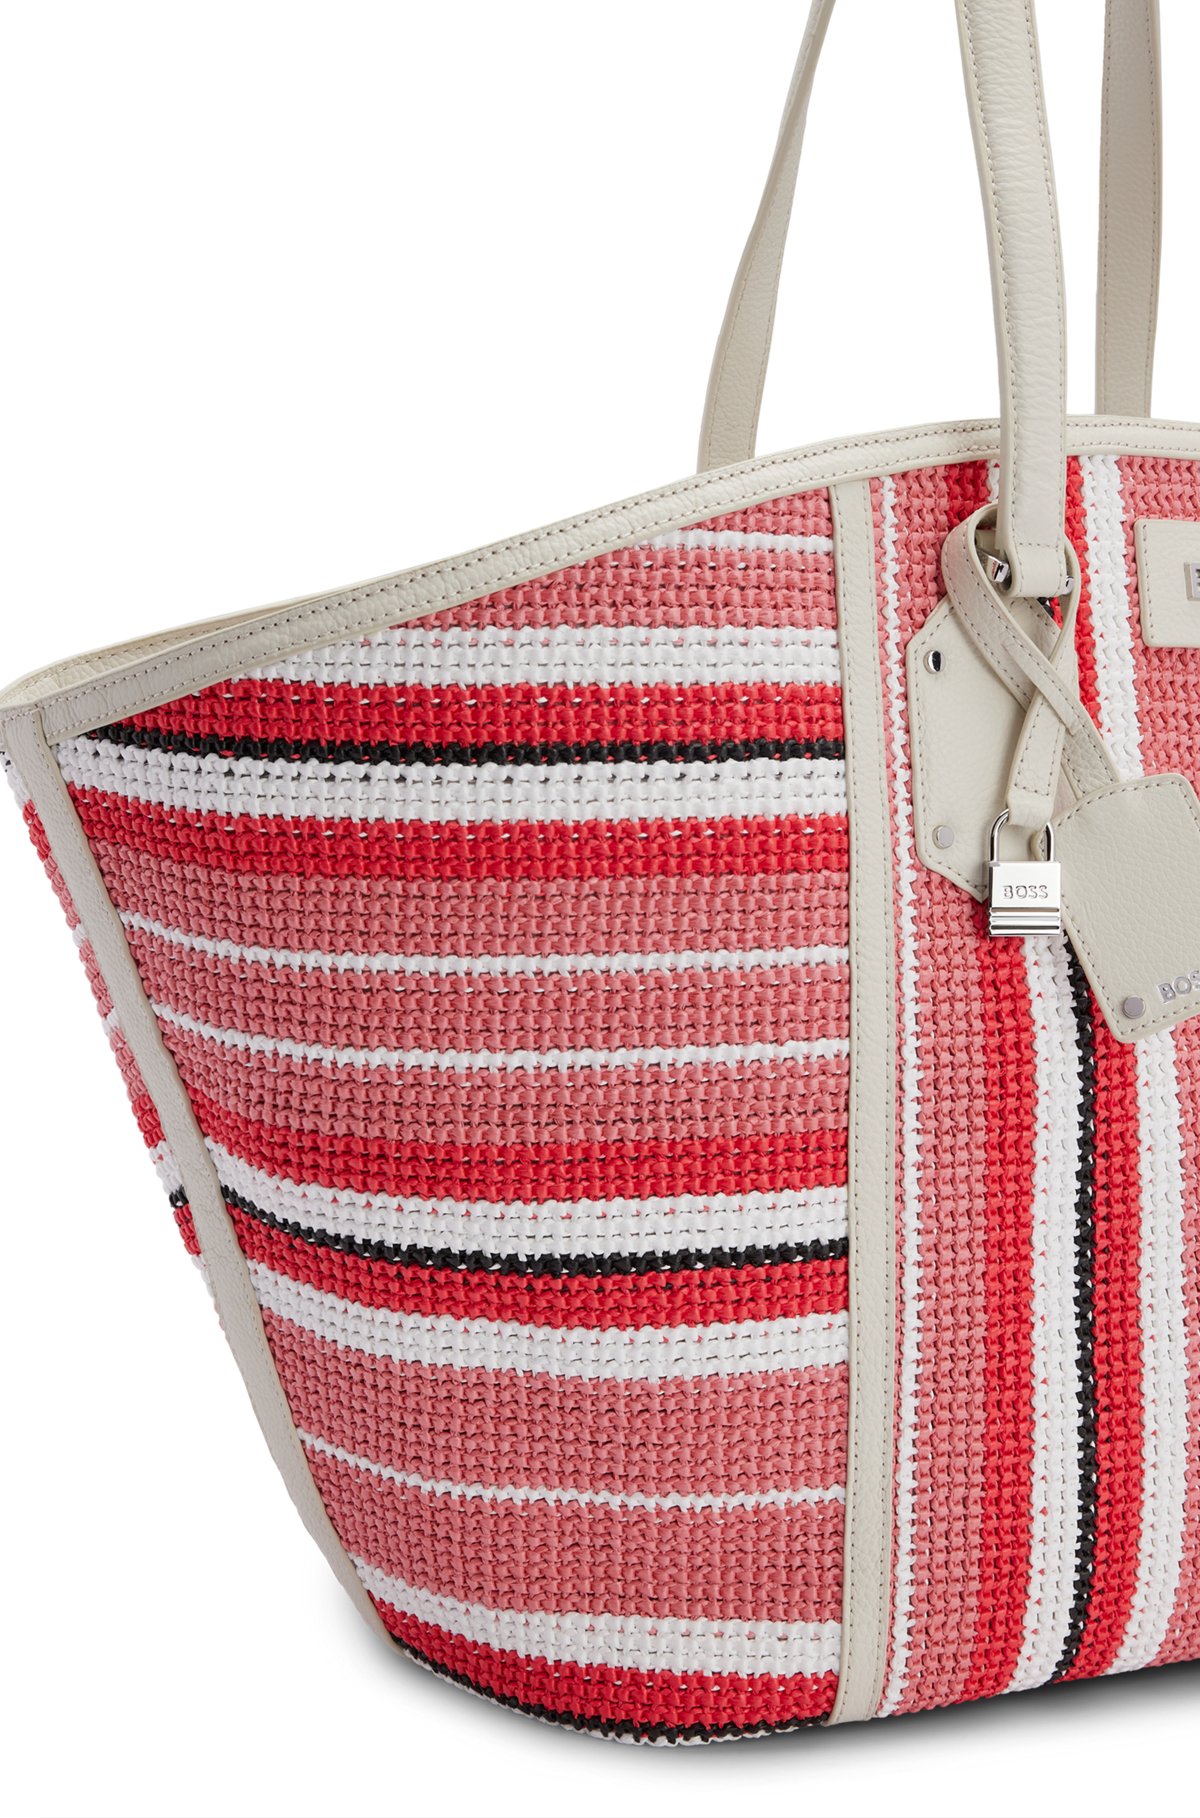 Leather-trimmed tote bag in multi-colored raffia, Pink